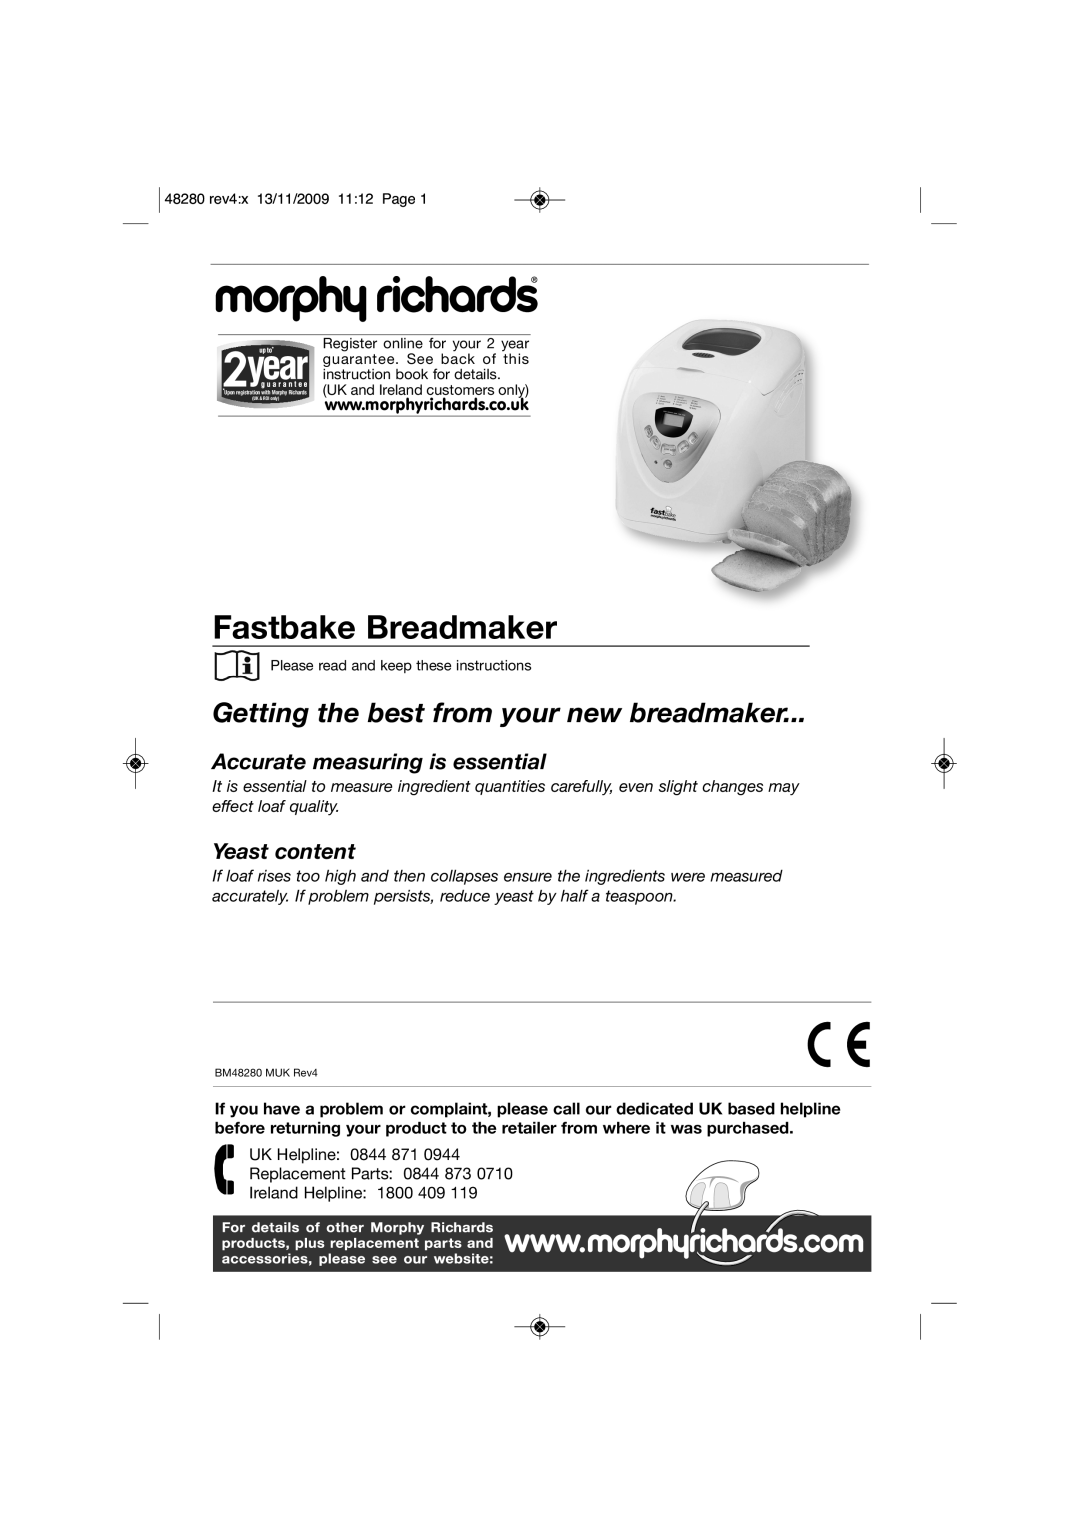 Morphy Richards BM48280 manual Fastbake Breadmaker, Getting the best from your new breadmaker, Yeast content 